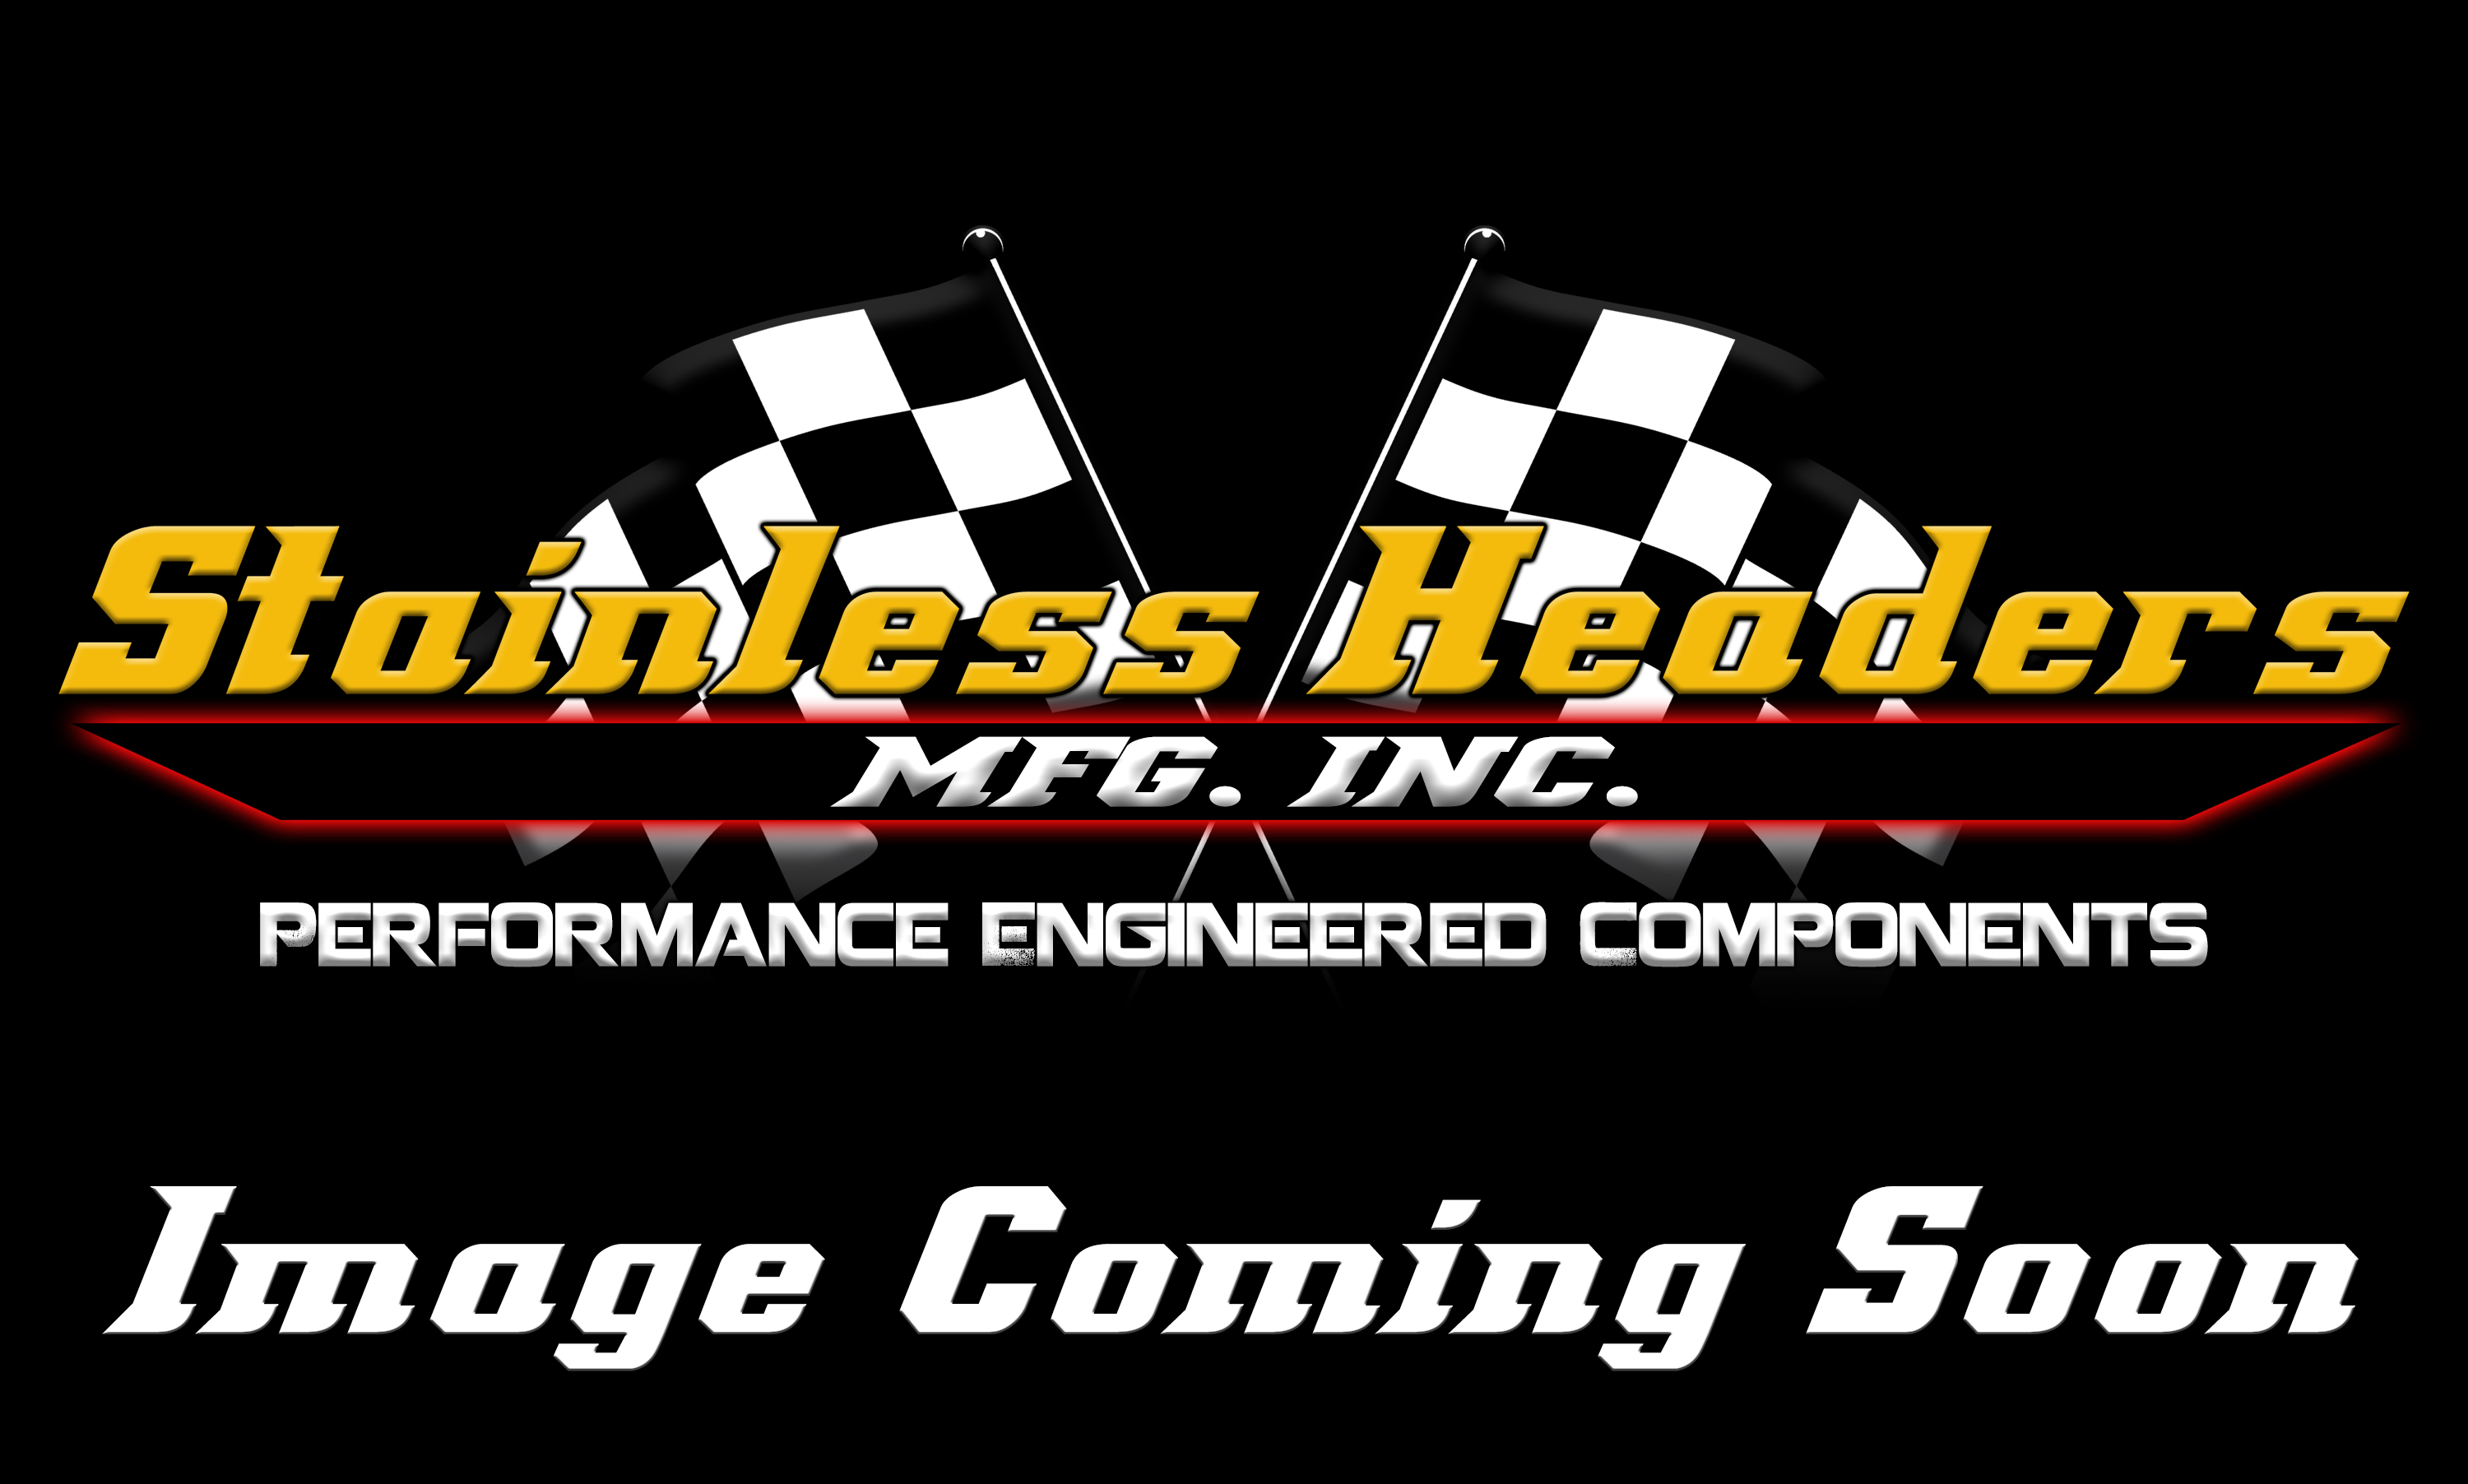 CompTurbo Technologies - CTR4818R-8090 Mid Frame Oil Lubricated 2.0 Turbocharger (1350 HP) - Image 3